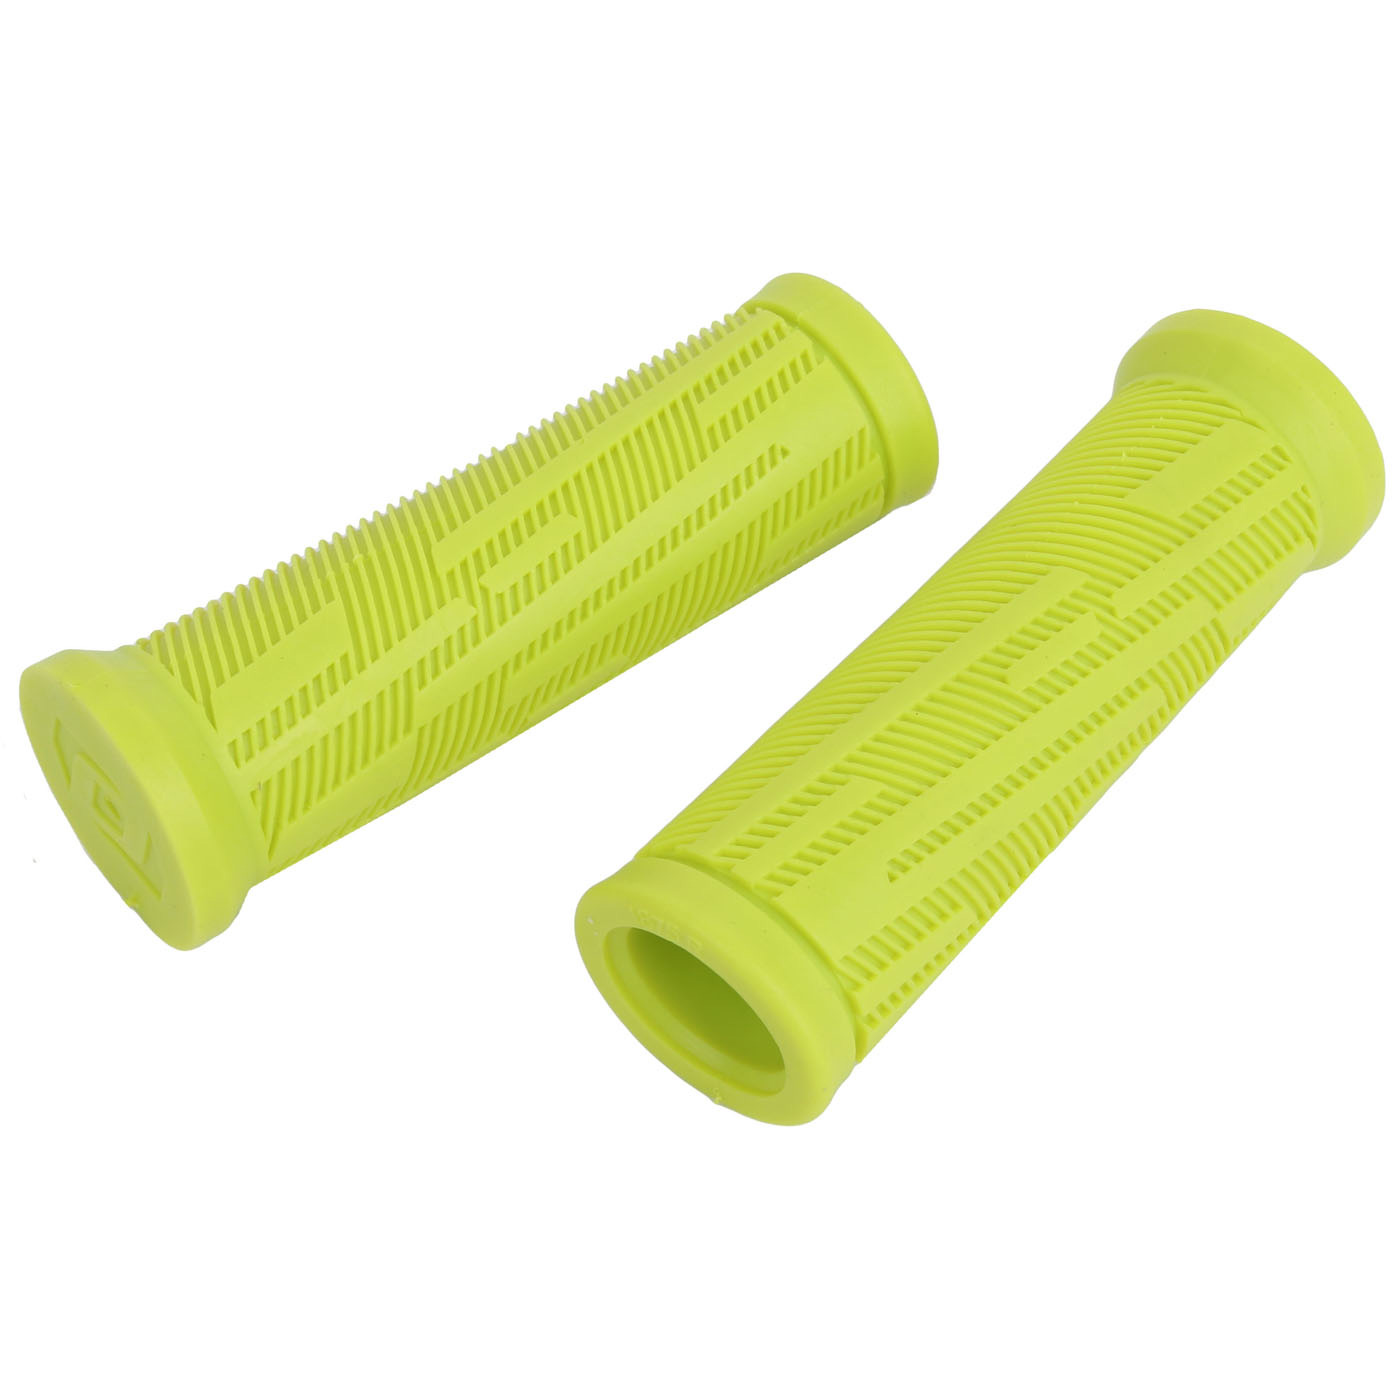 Picture of Syncros Kids Grips - radium yellow